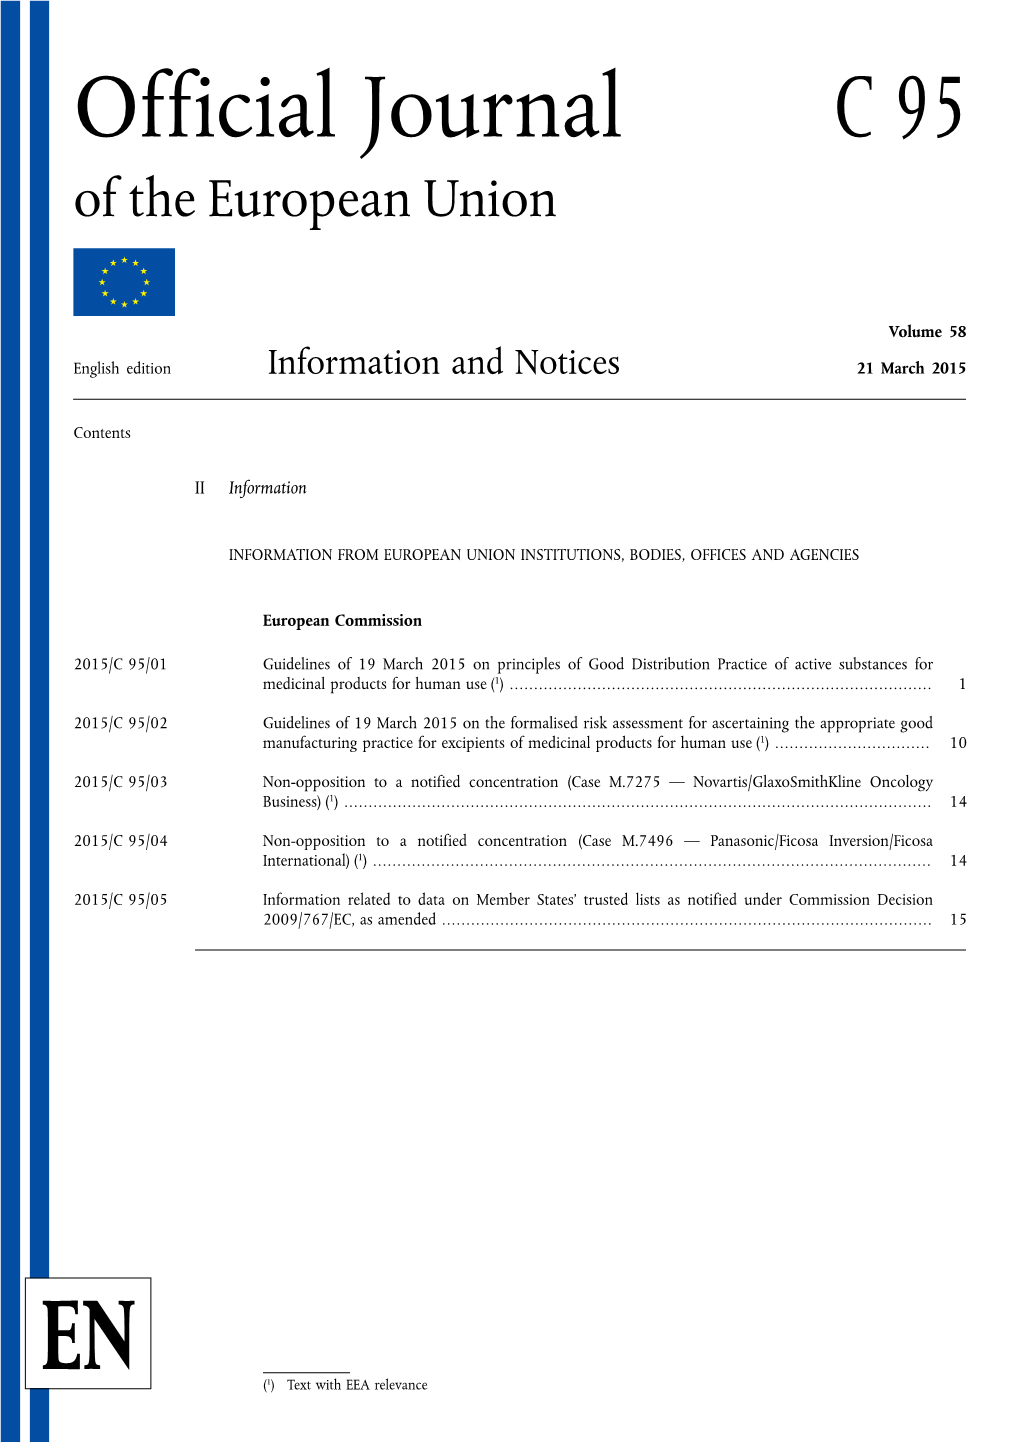 Official Journal C 95 of the European Union